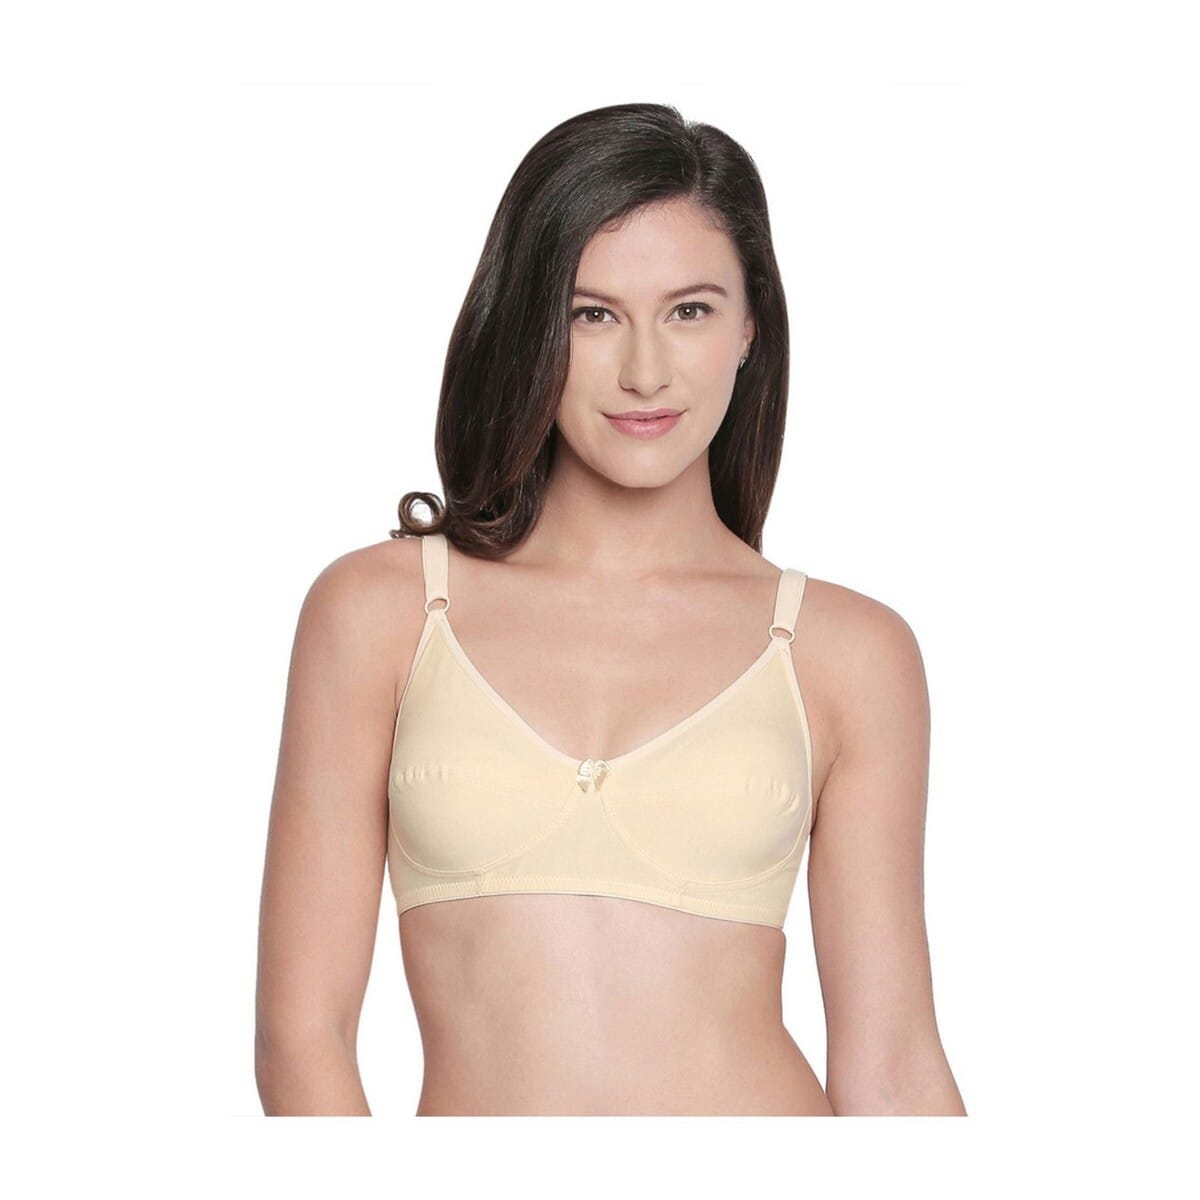 KTM Retails - #Bodycare #WomenInnerwears - - - - - - - - - - - Product: Sports  Bra Code no: 1607B Price: Nrs. 420 - - - - - - - - - - - KTM Reatils  Contact us for home delivery: 4233312